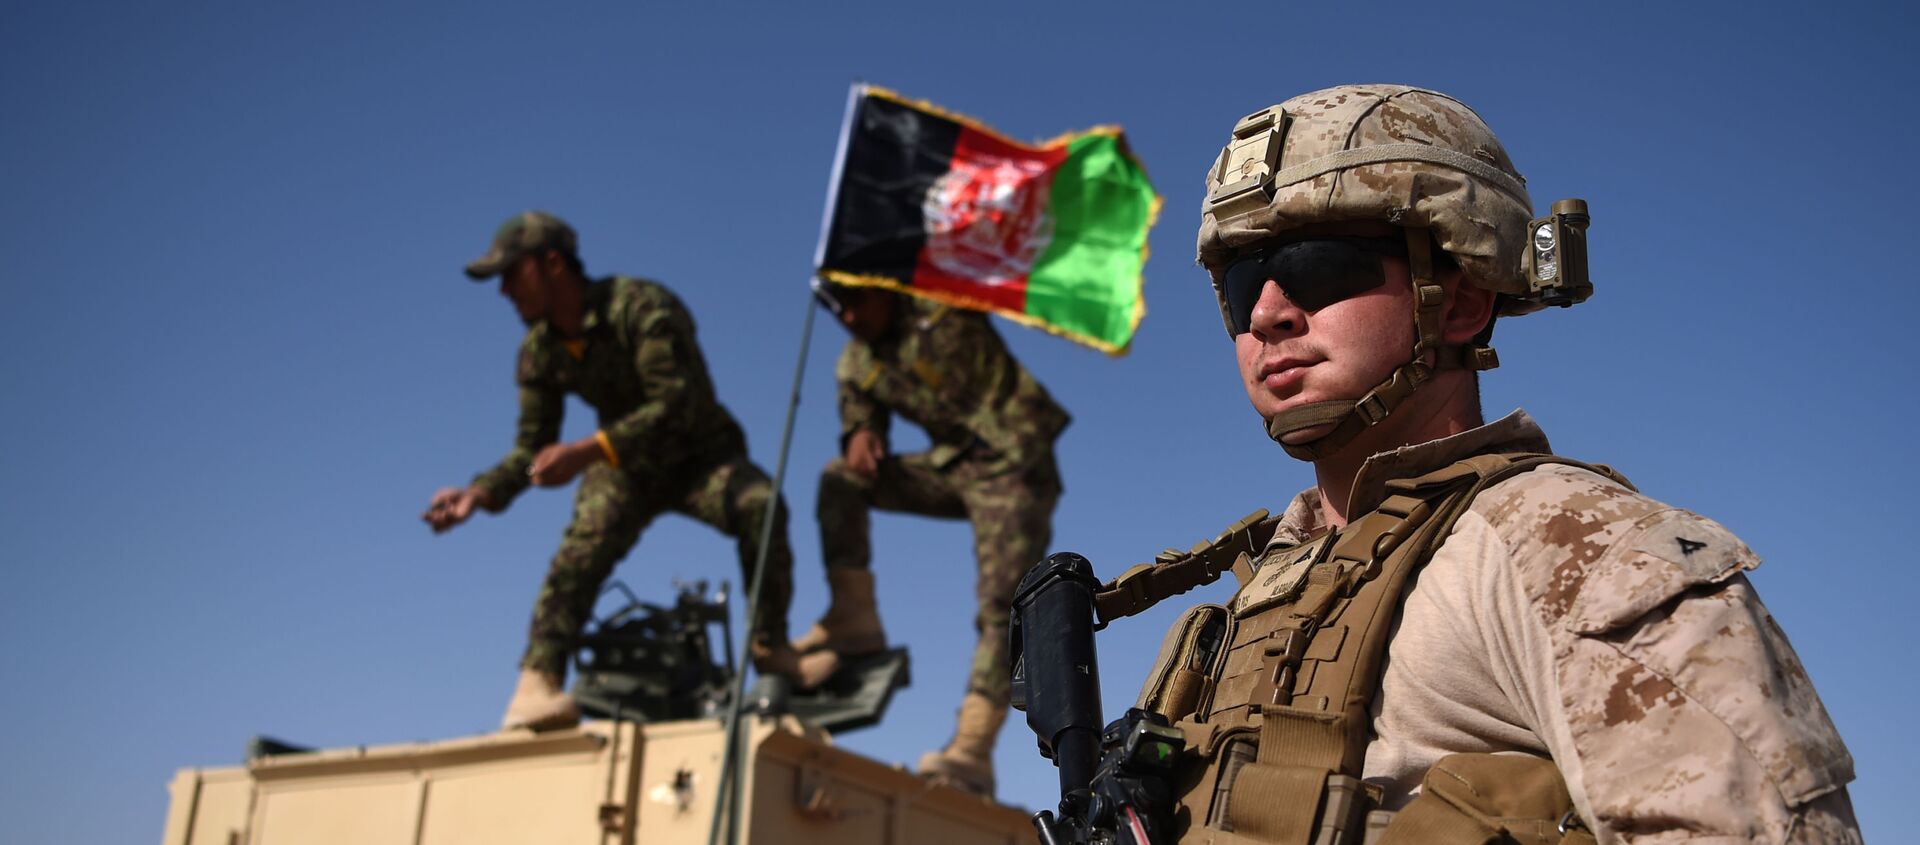 In this photograph taken on August 28, 2017, a US Marine looks on as Afghan National Army soldiers raise the Afghan National flag on an armed vehicle during a training exercise to deal with IEDs (improvised explosive devices) at the Shorab Military Camp in Lashkar Gah in Helmand province. - Marines in Afghanistan's Helmand say Donald Trump's decision to keep boots on the ground indefinitely gives them all the time in the world to retake the province, once the symbol of US intervention but now a Taliban stronghold. They may need it. At the hot, dusty Camp Shorab, where many of the recently deployed Marines train their Afghan counterparts in flat, desert terrain, the Afghans admit th - Sputnik International, 1920, 16.01.2021